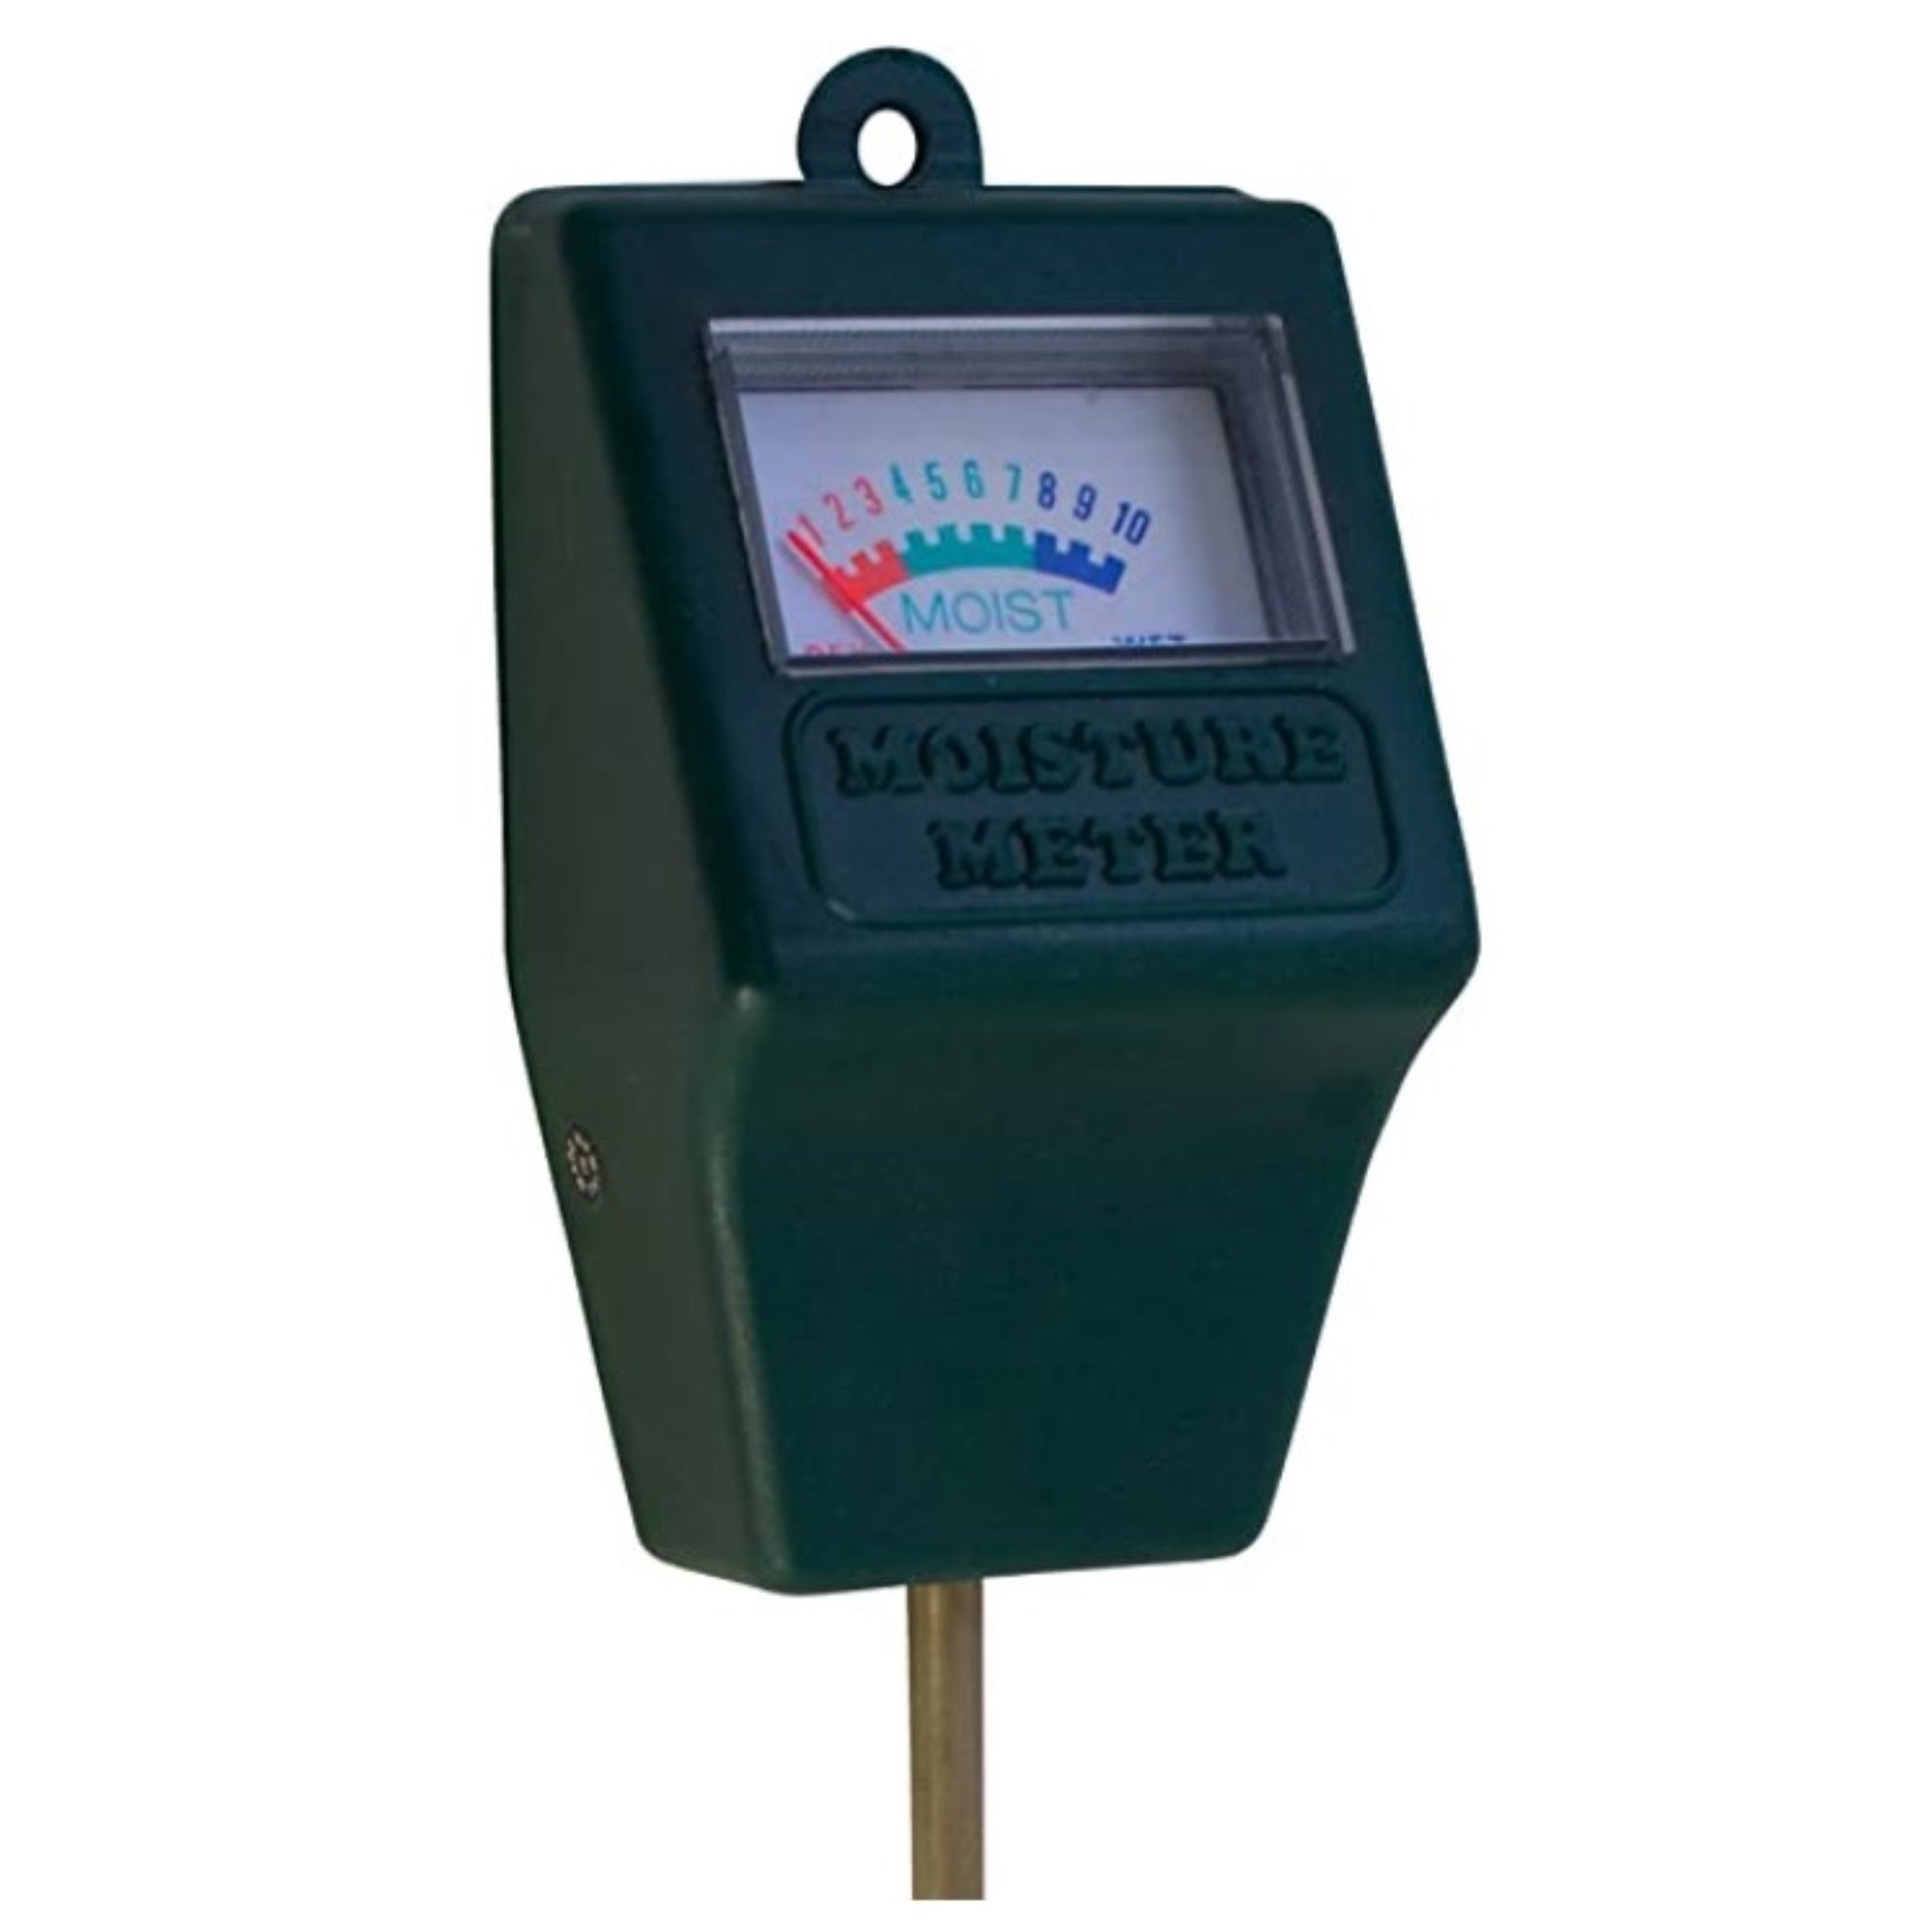 Flexrake Classic Moisture Meter To Indicate the Level Of Moisture In Soil, 12"